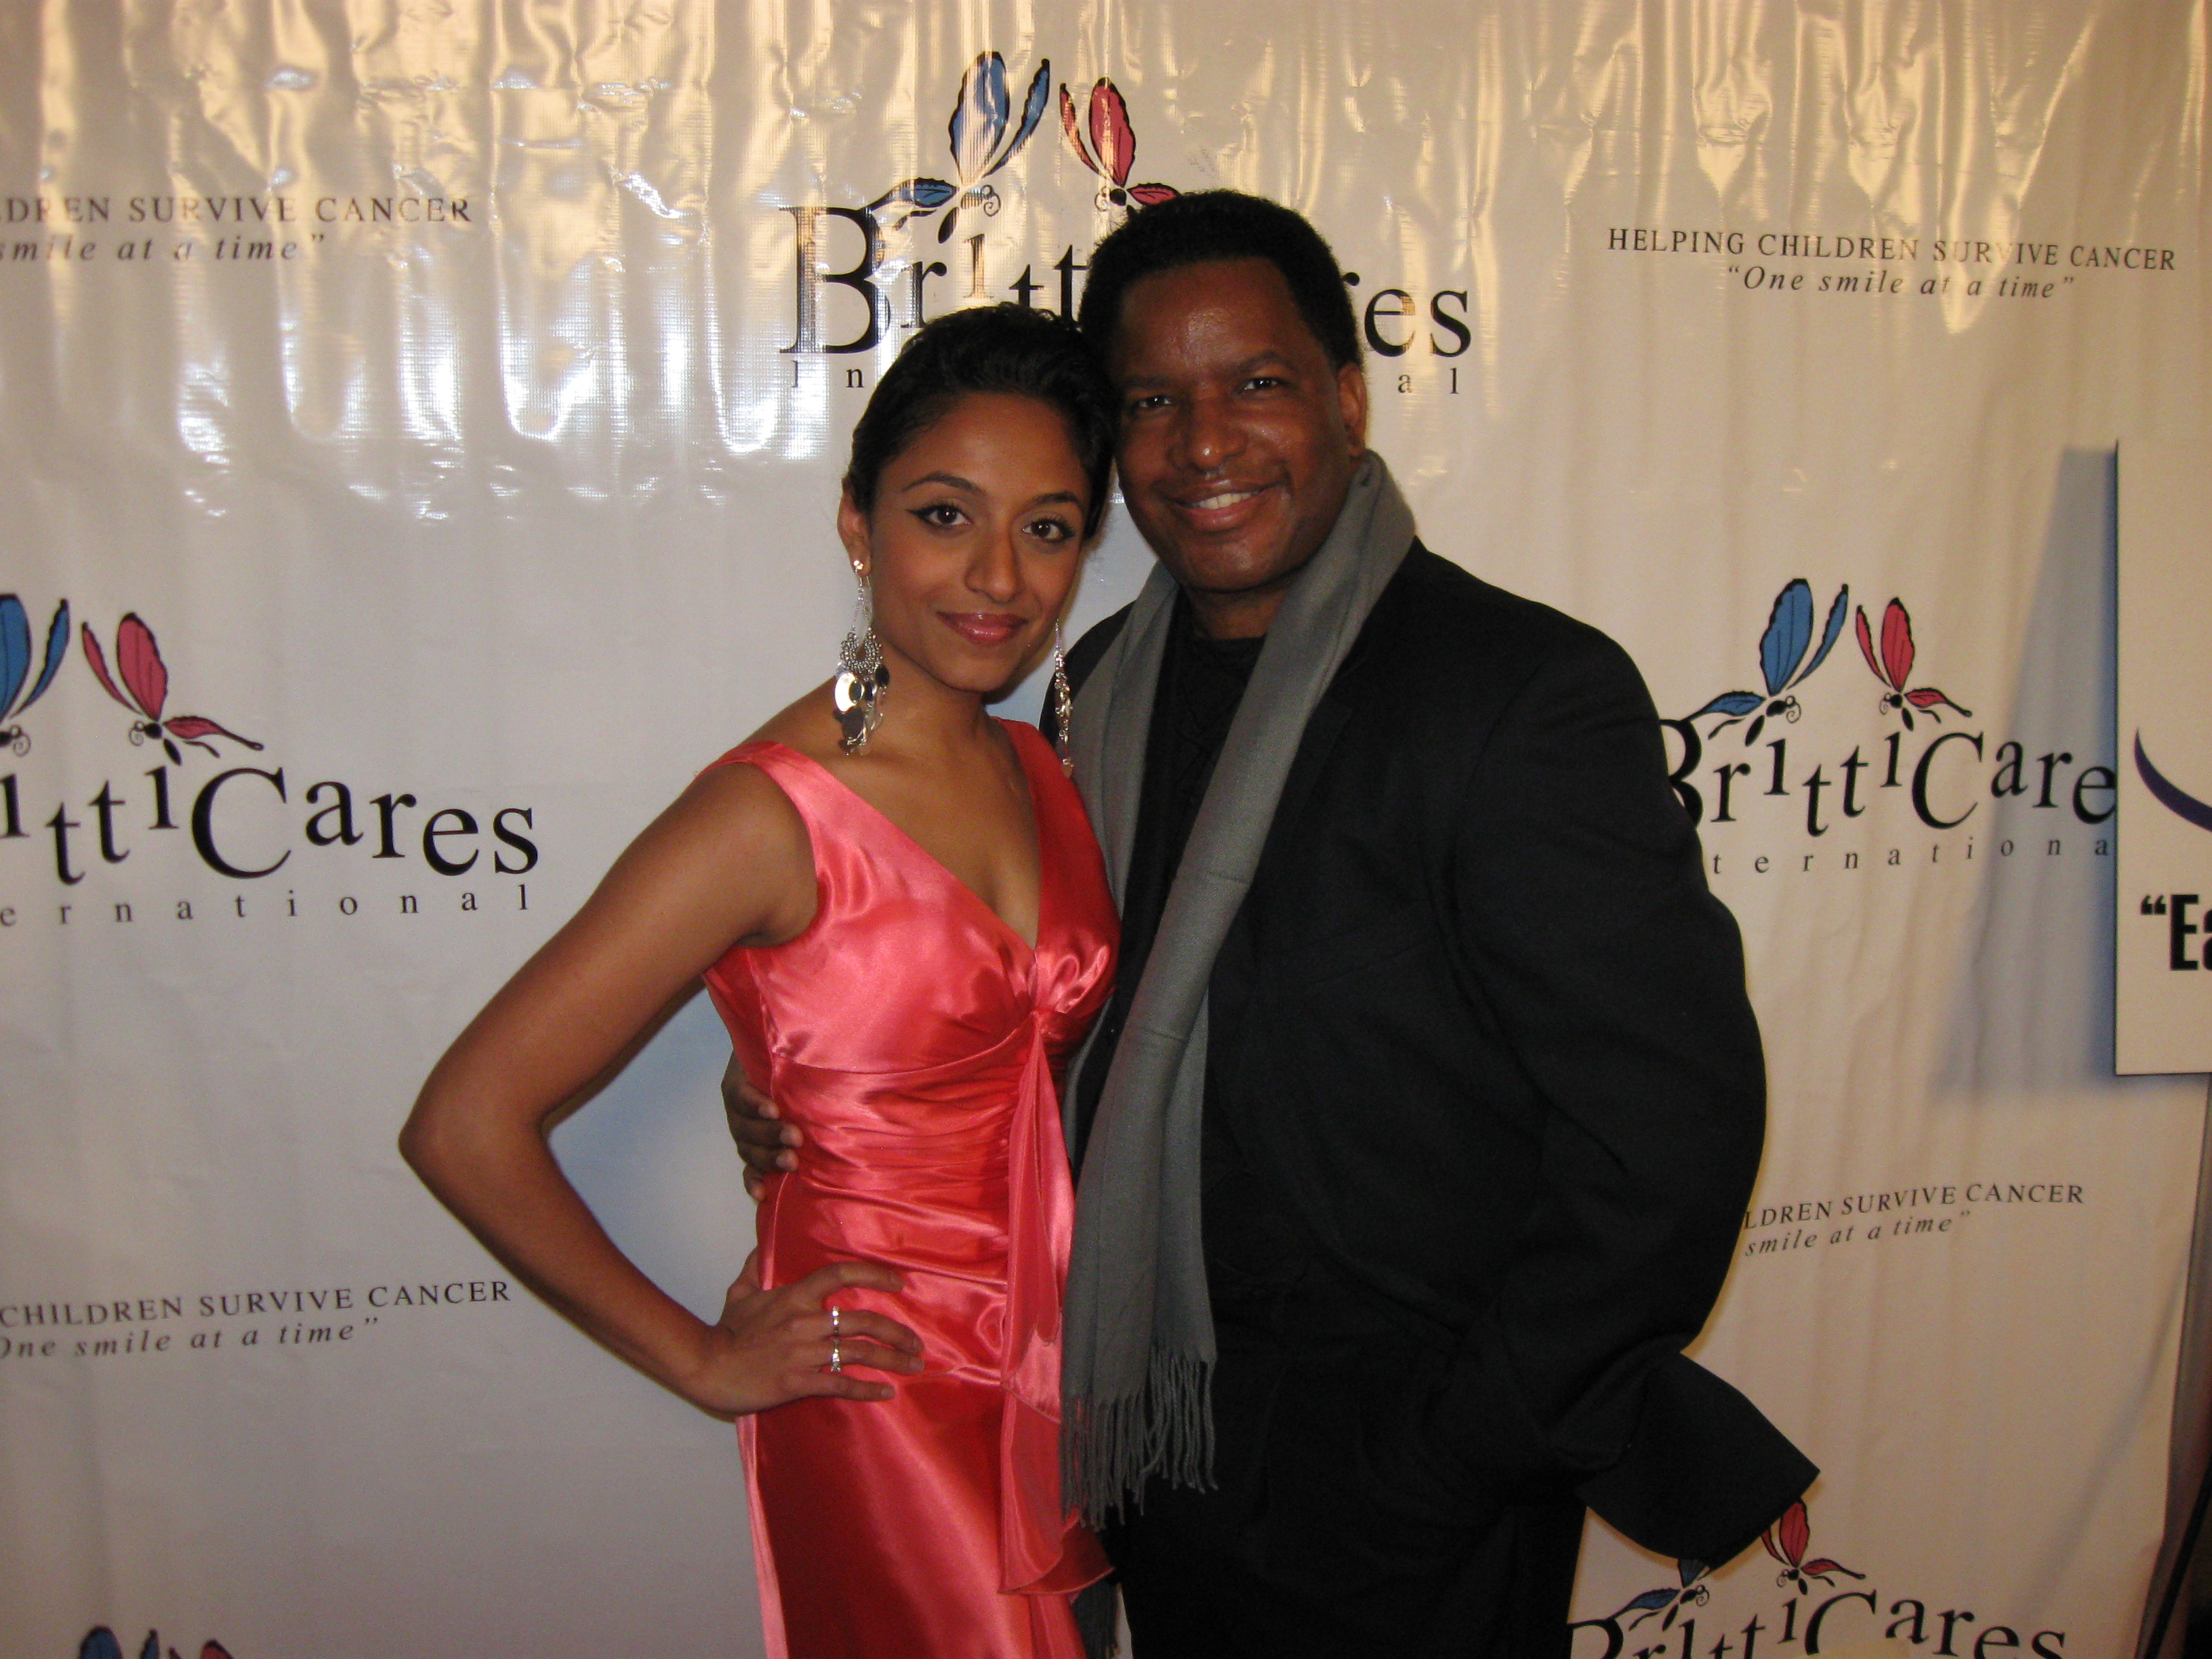 Producer Kirby Britten and actress Nandini Iyer arrives at the Briticares Foundation Gala in Hollywood, CA.